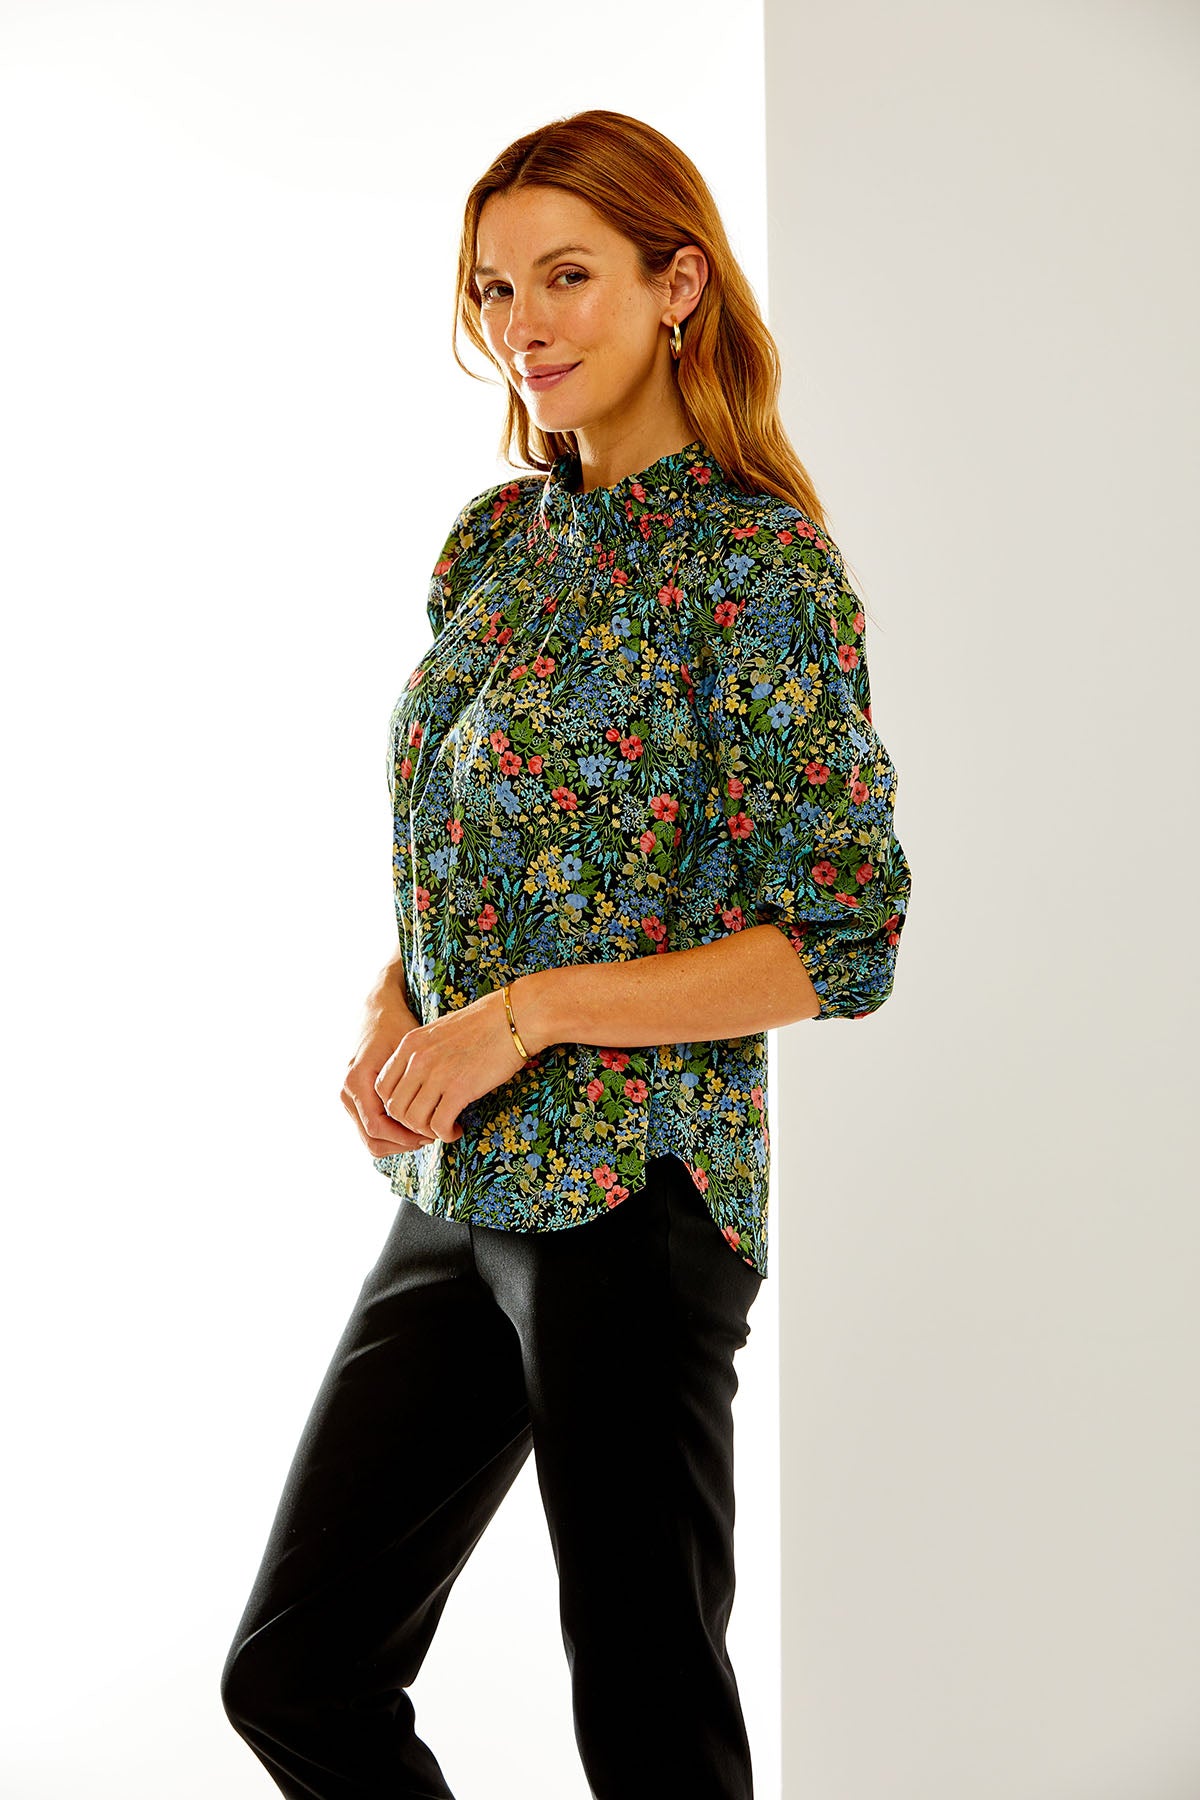 Woman in floral top